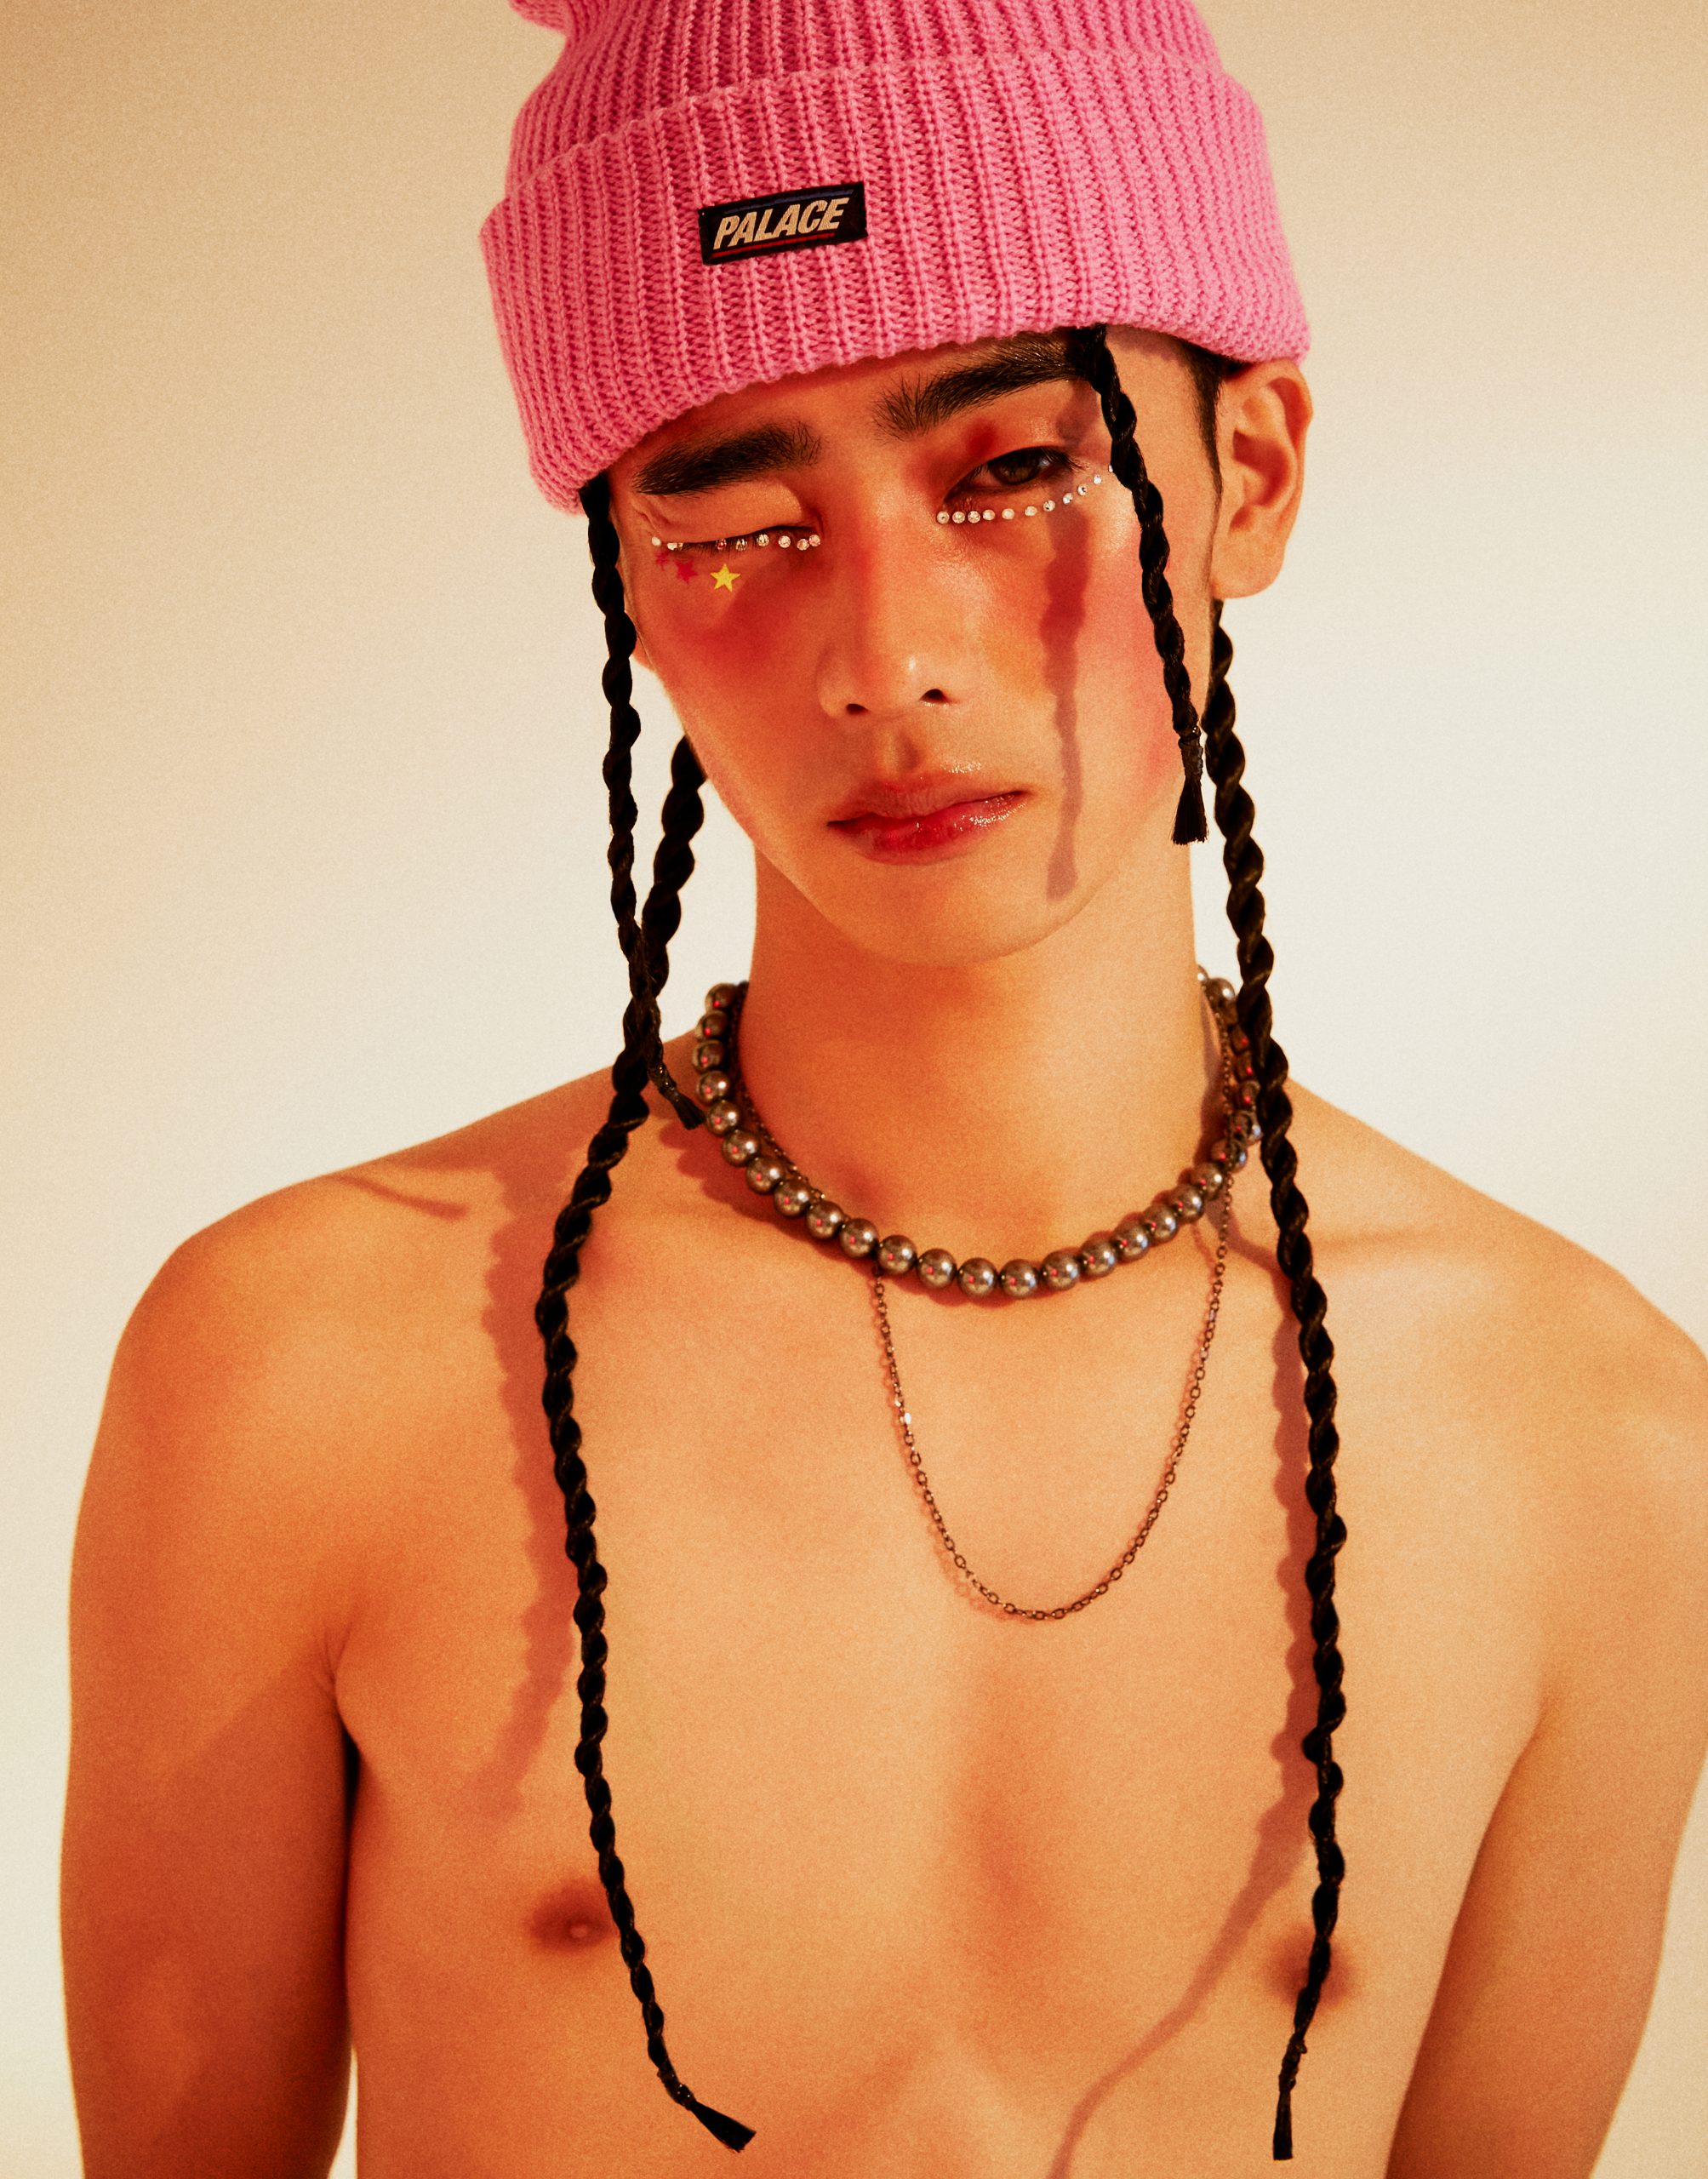 Man with pink beanie and long braids